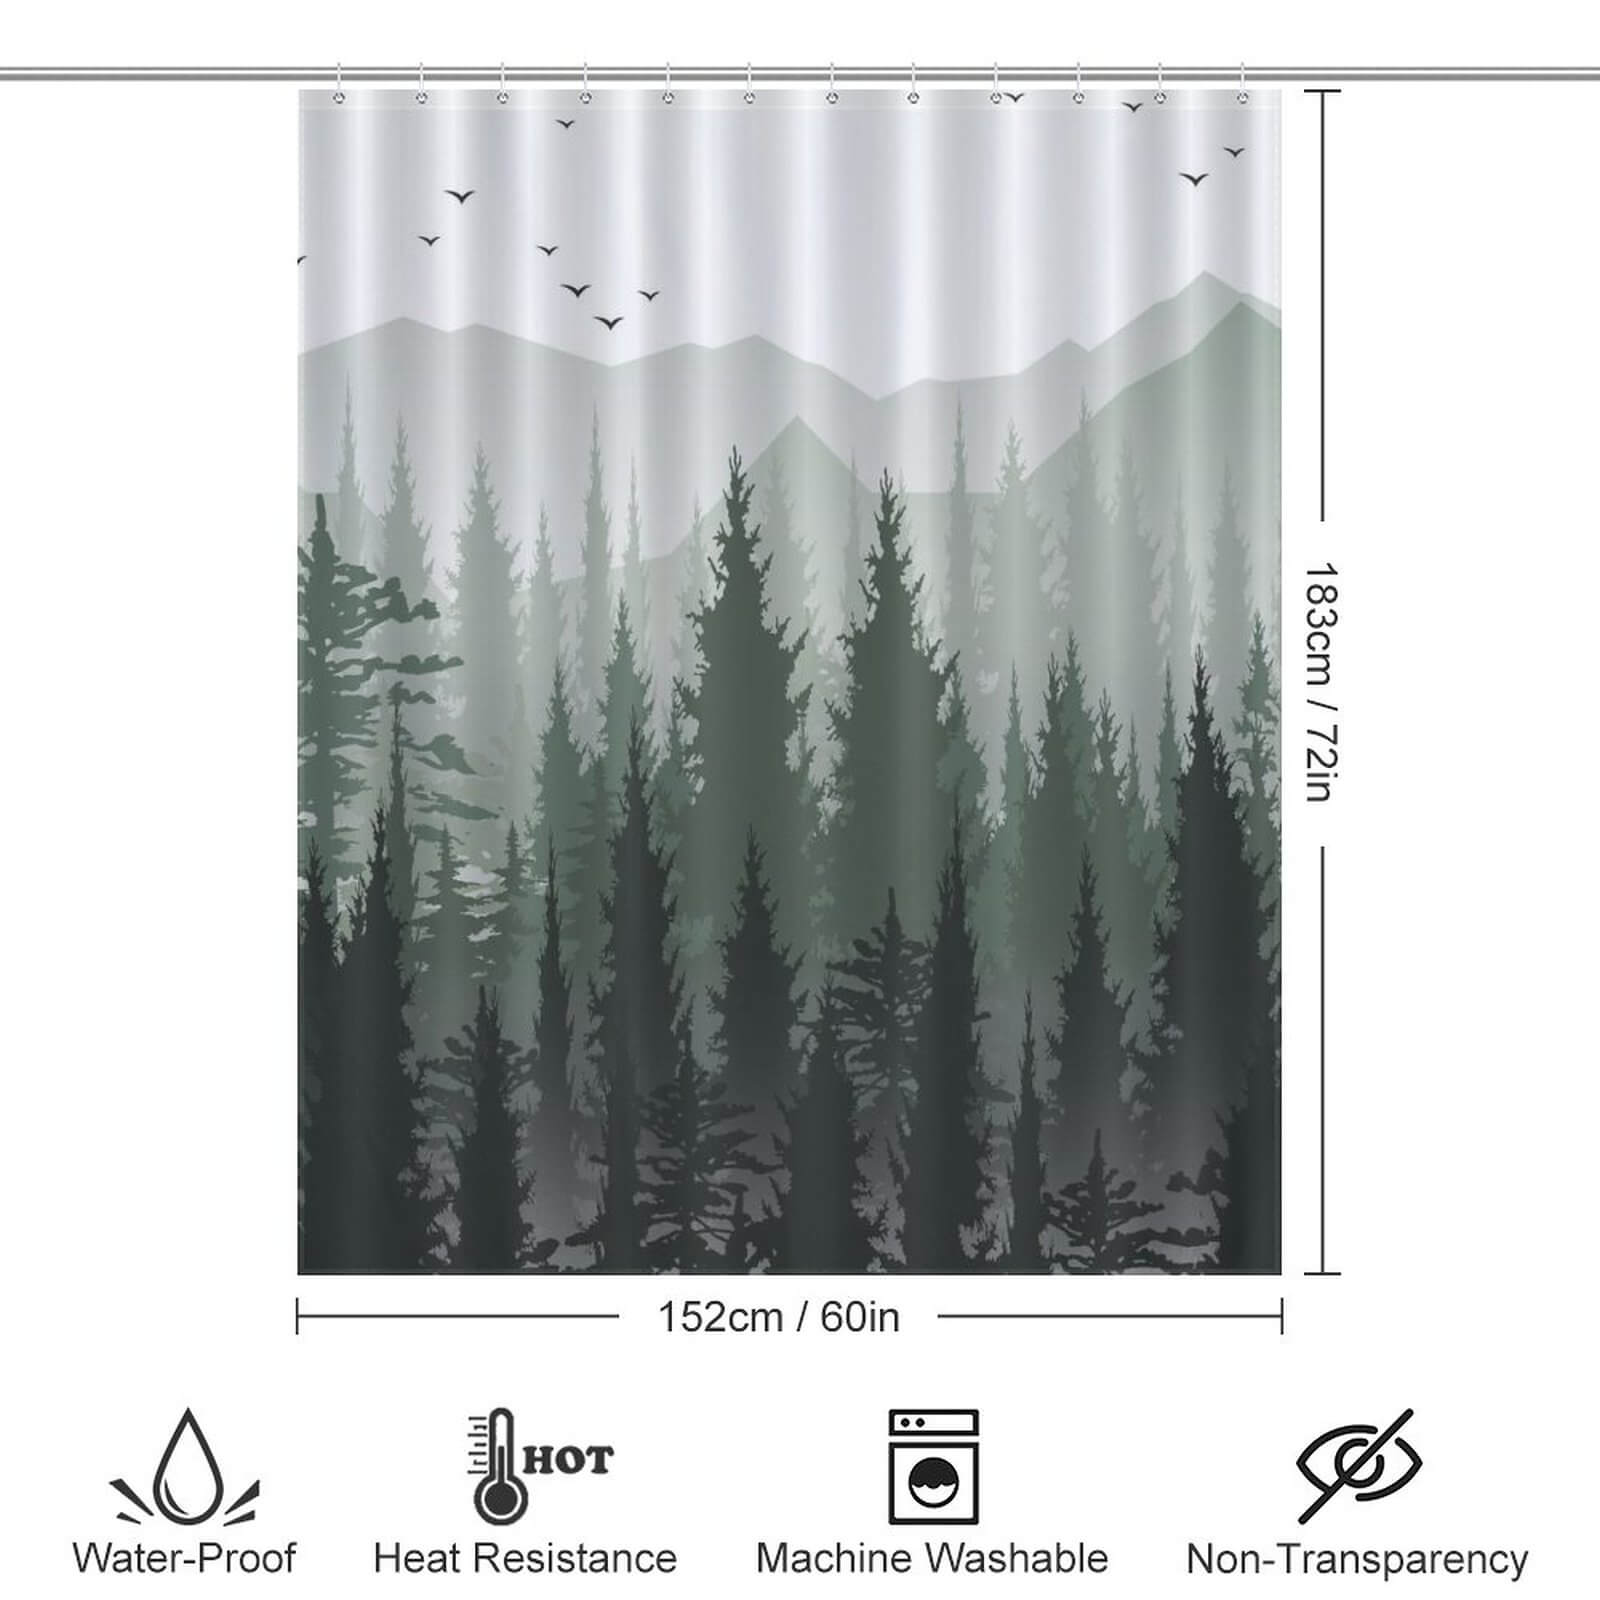 A minimalist design Green Misty Forest Shower Curtain-Cottoncat, featuring trees and birds, that is waterproof, by Cotton Cat.